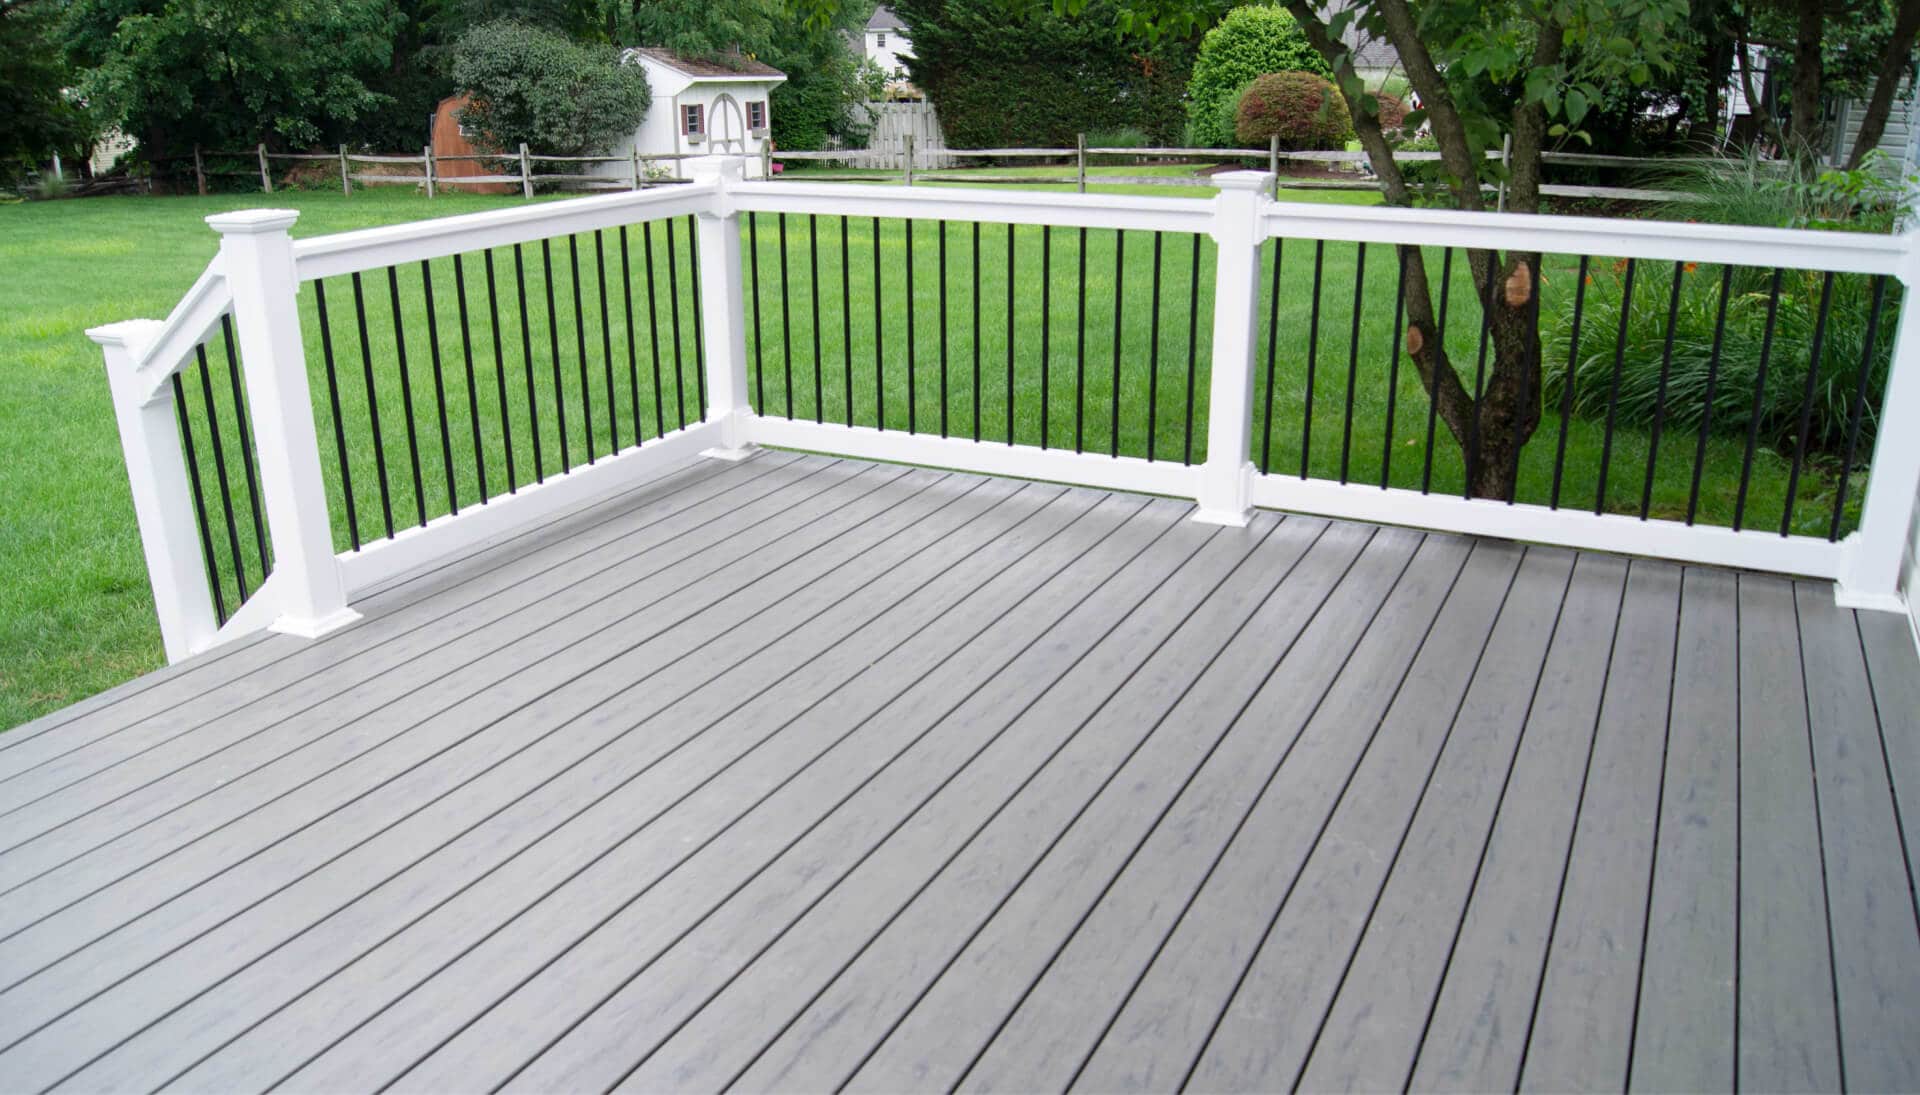 Transform Your Lowa City, IA Deck with Our Deck Builders' Beautiful Railing and Covers